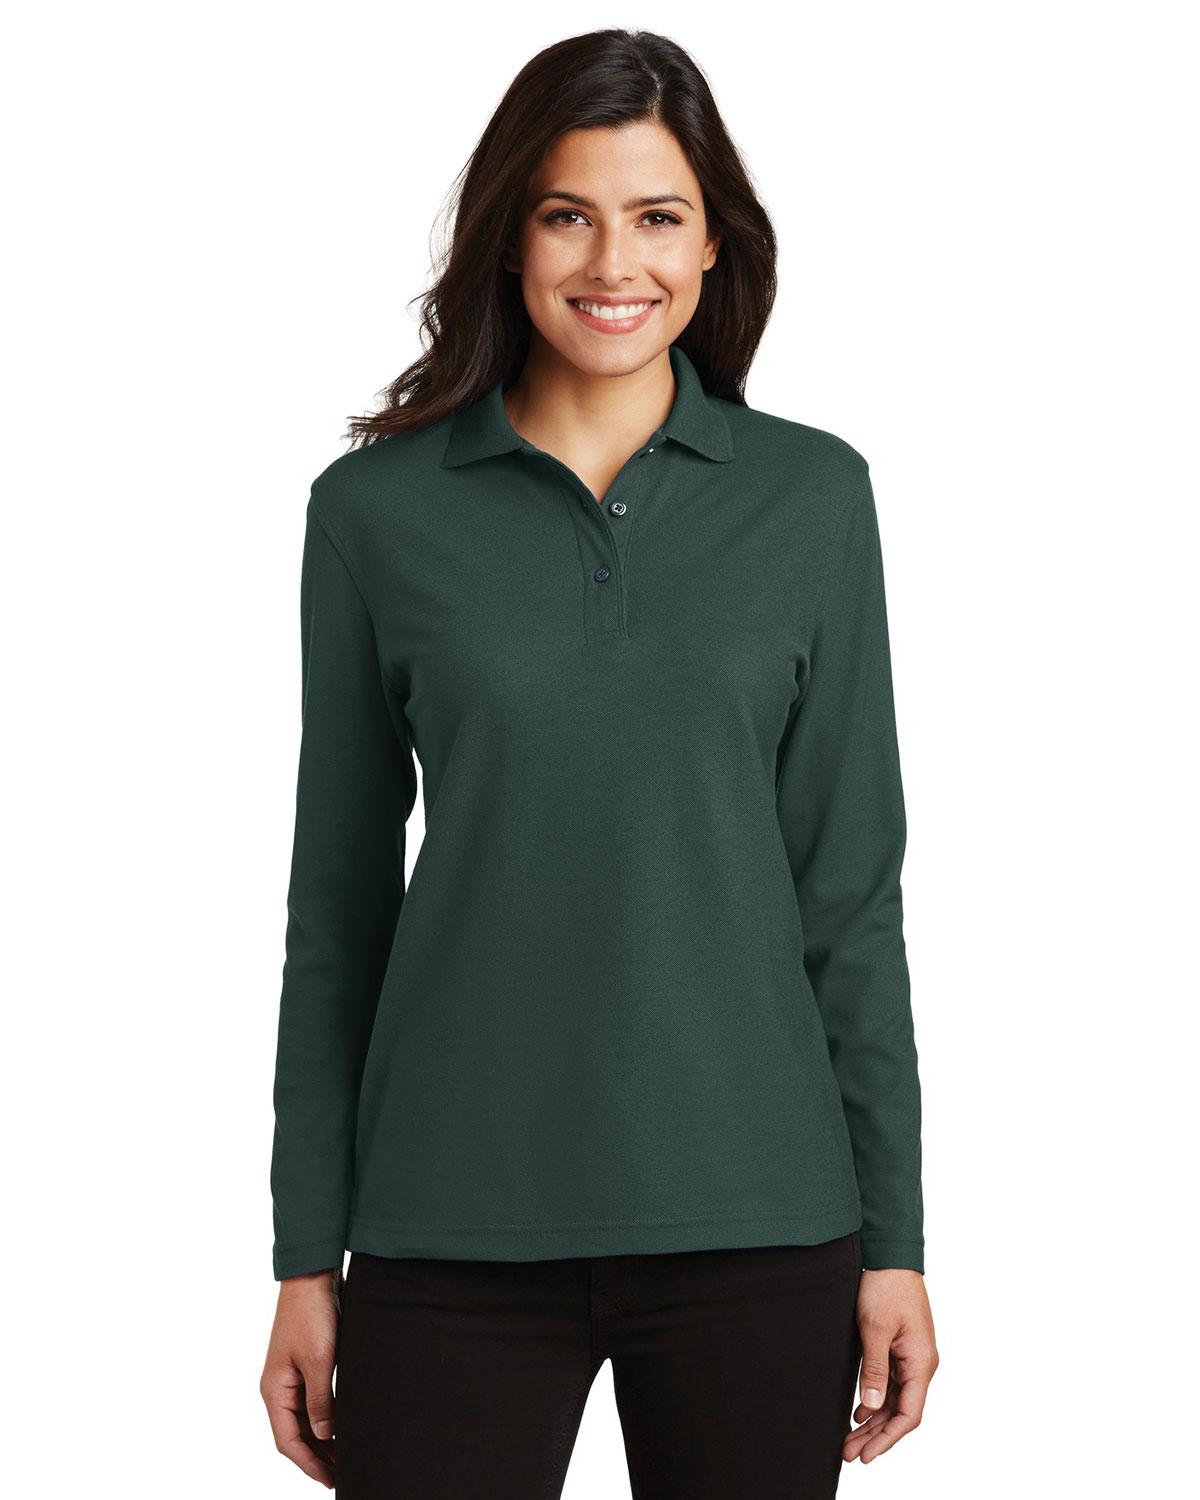 Port Authority L500LS Women Long-Sleeve Silk Touch Polo at Apparelstation